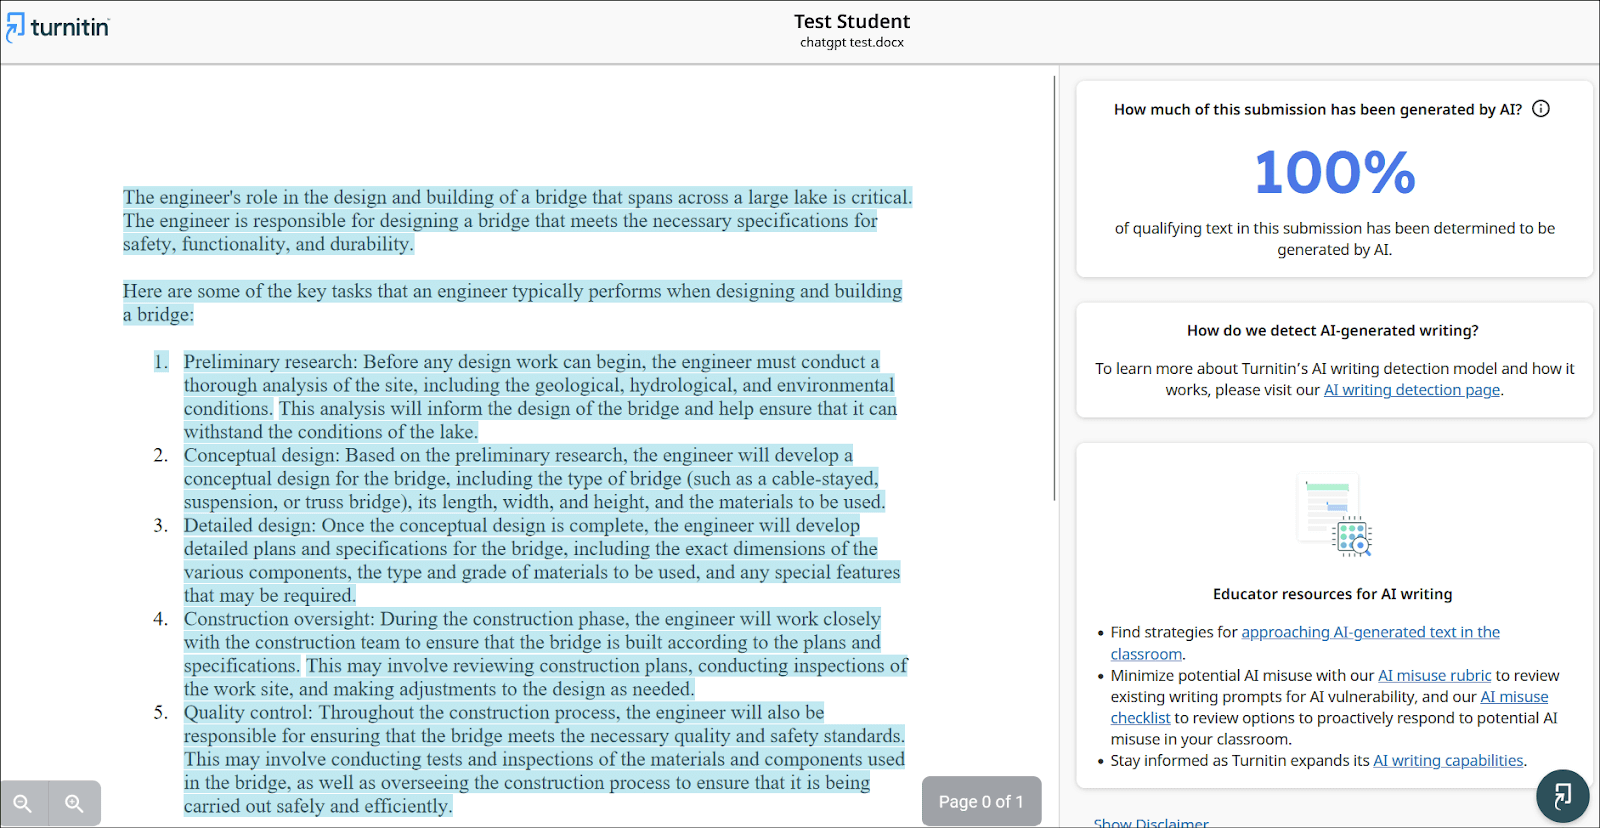  Turnitin can detect ChatGPT content